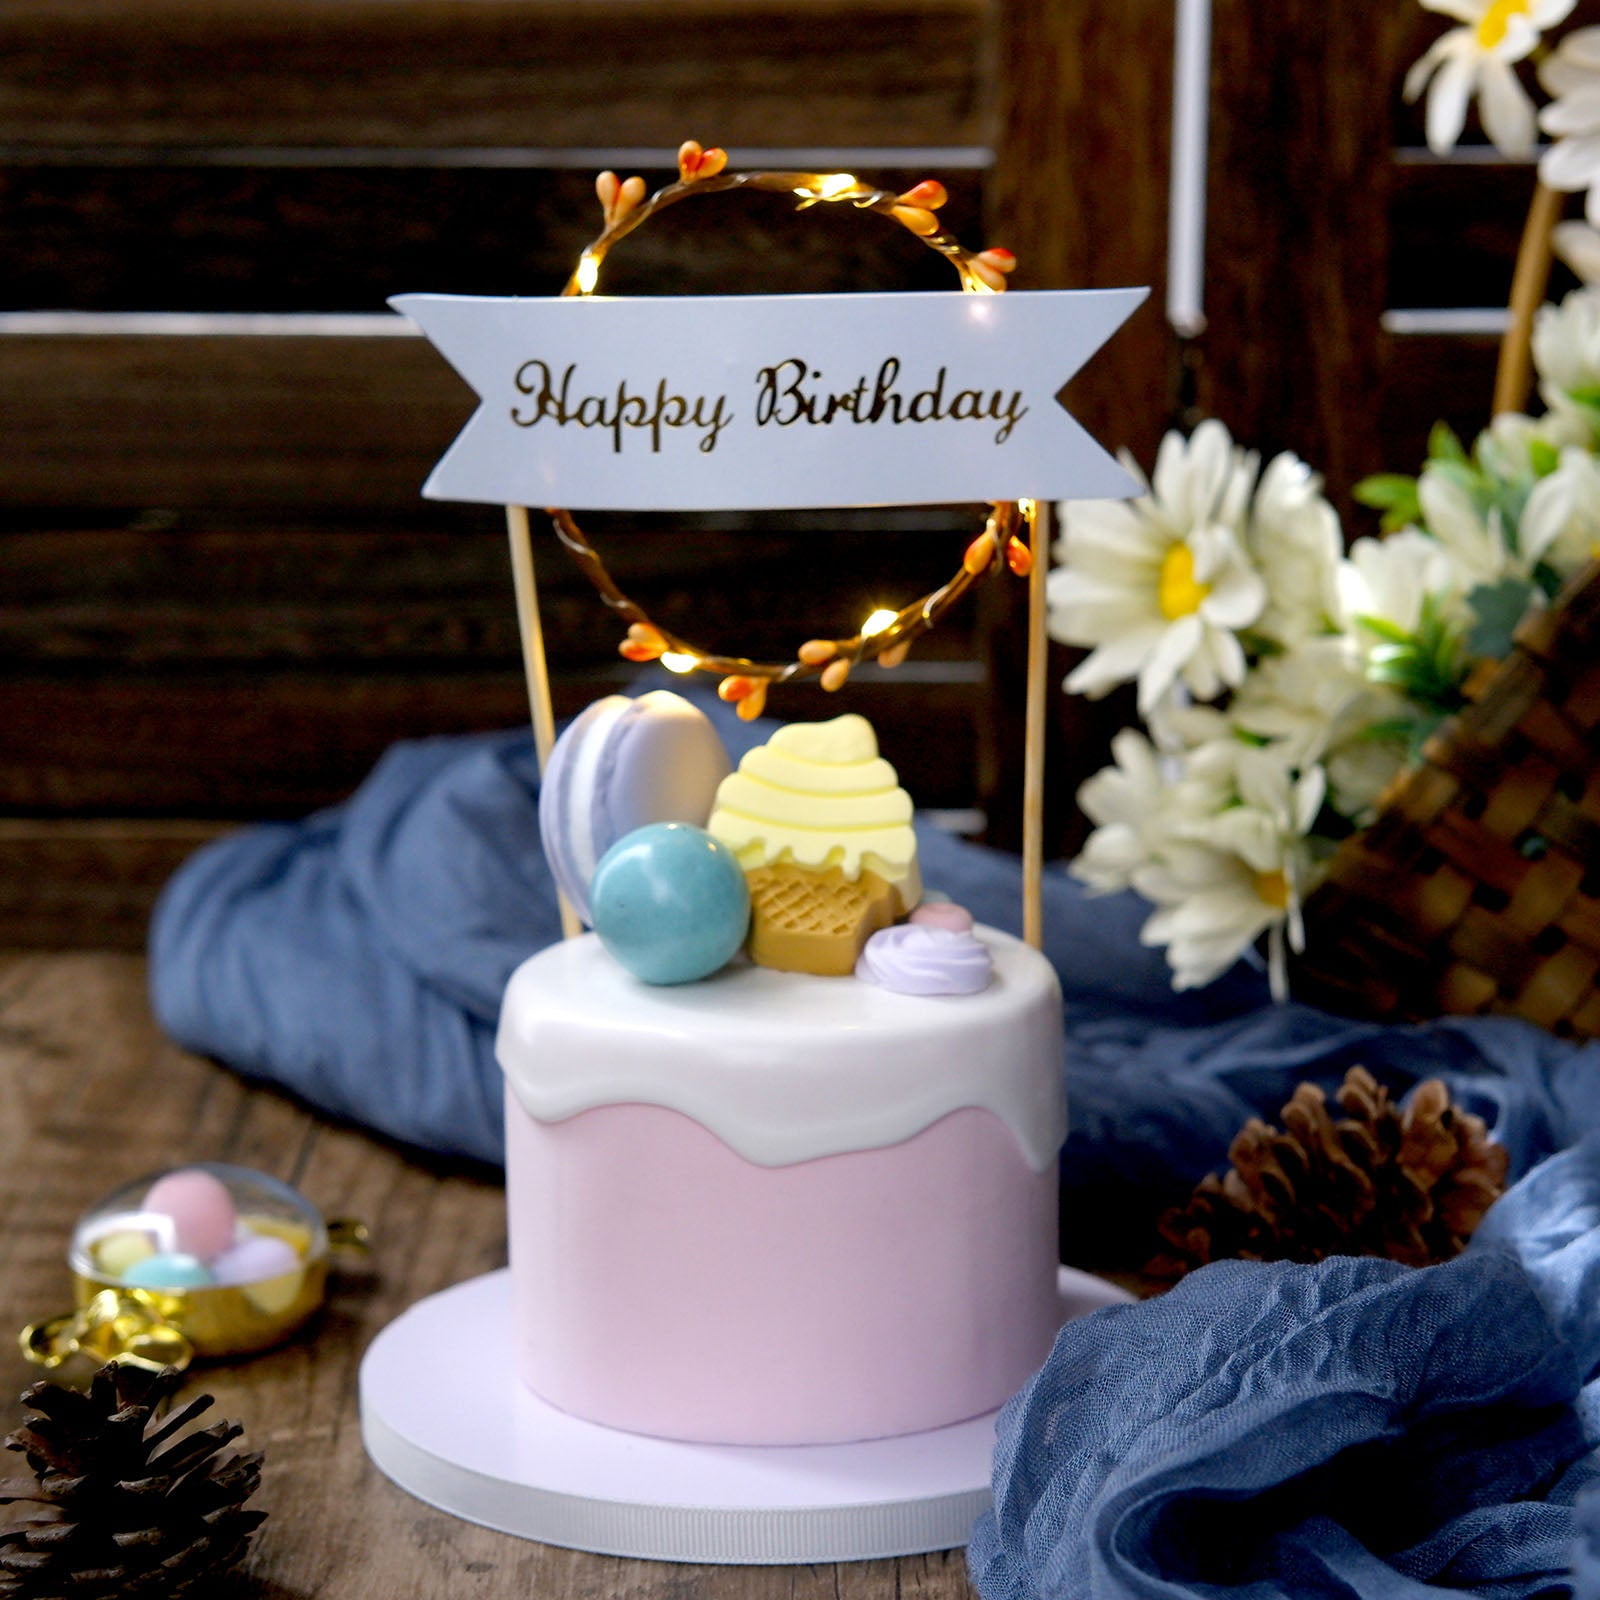 Happy Birthday LED Cake Topper, Floral Wreath Cake Topper With Flashing Light for Garland Cake Lovely Decoration with Led Light Birthday Party - Walmart.com